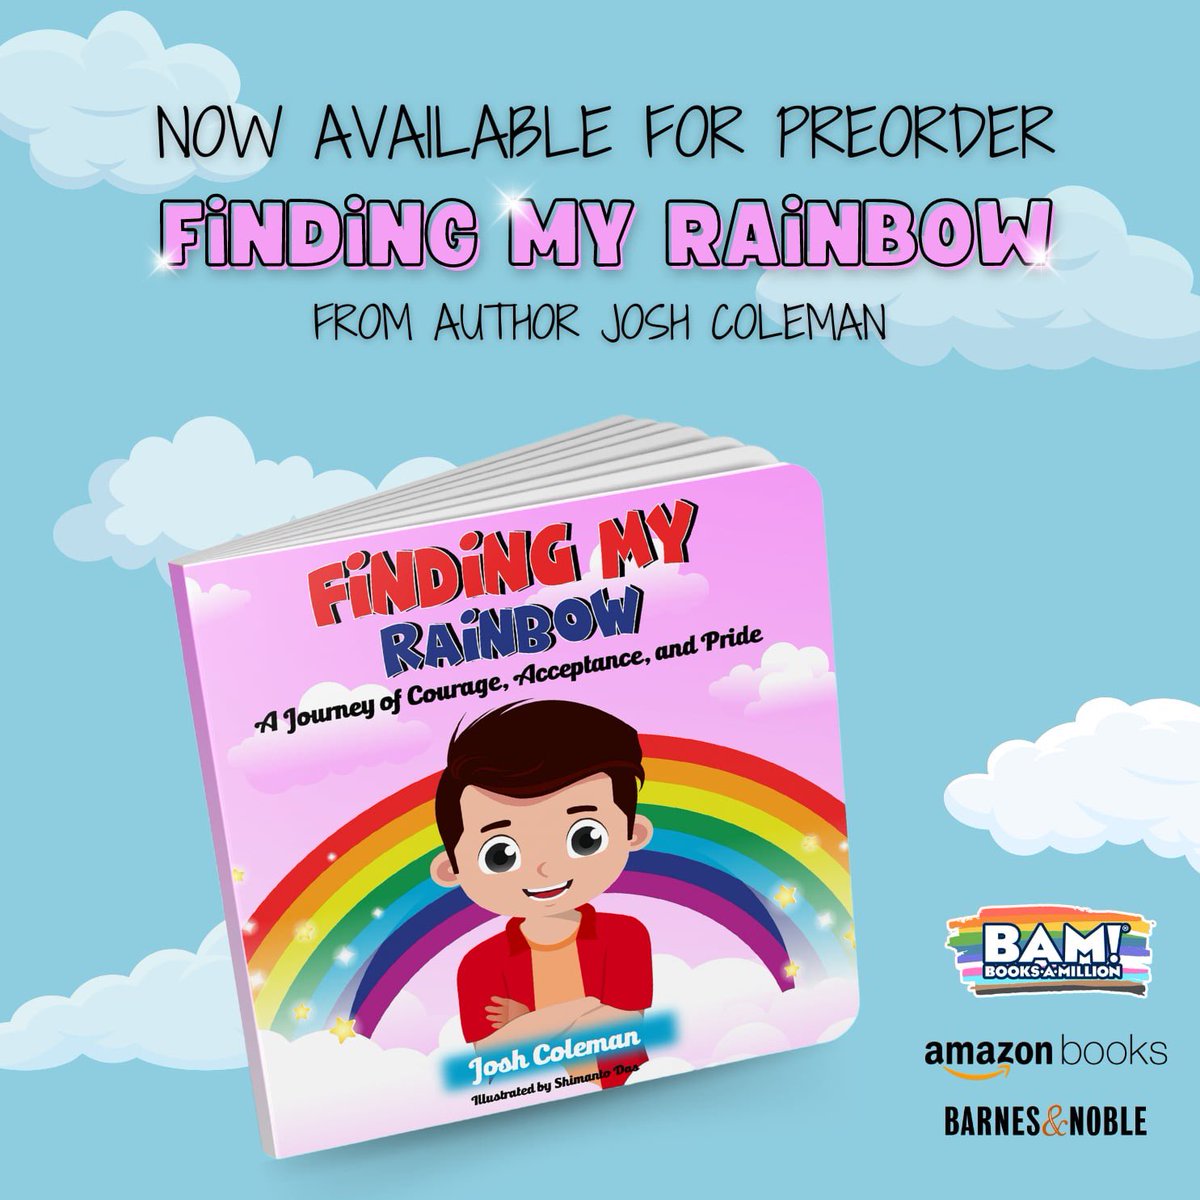 🌟🌈 'Finding My Rainbow' is ready for pre-order! Join my journey of courage, acceptance, and pride in this must-read children's book. A story that celebrates being true to who you are. Pre-order your copy today! 📚💖 colemanjosh.com/findingmyrainb… #FindingMyRainbow #Pride